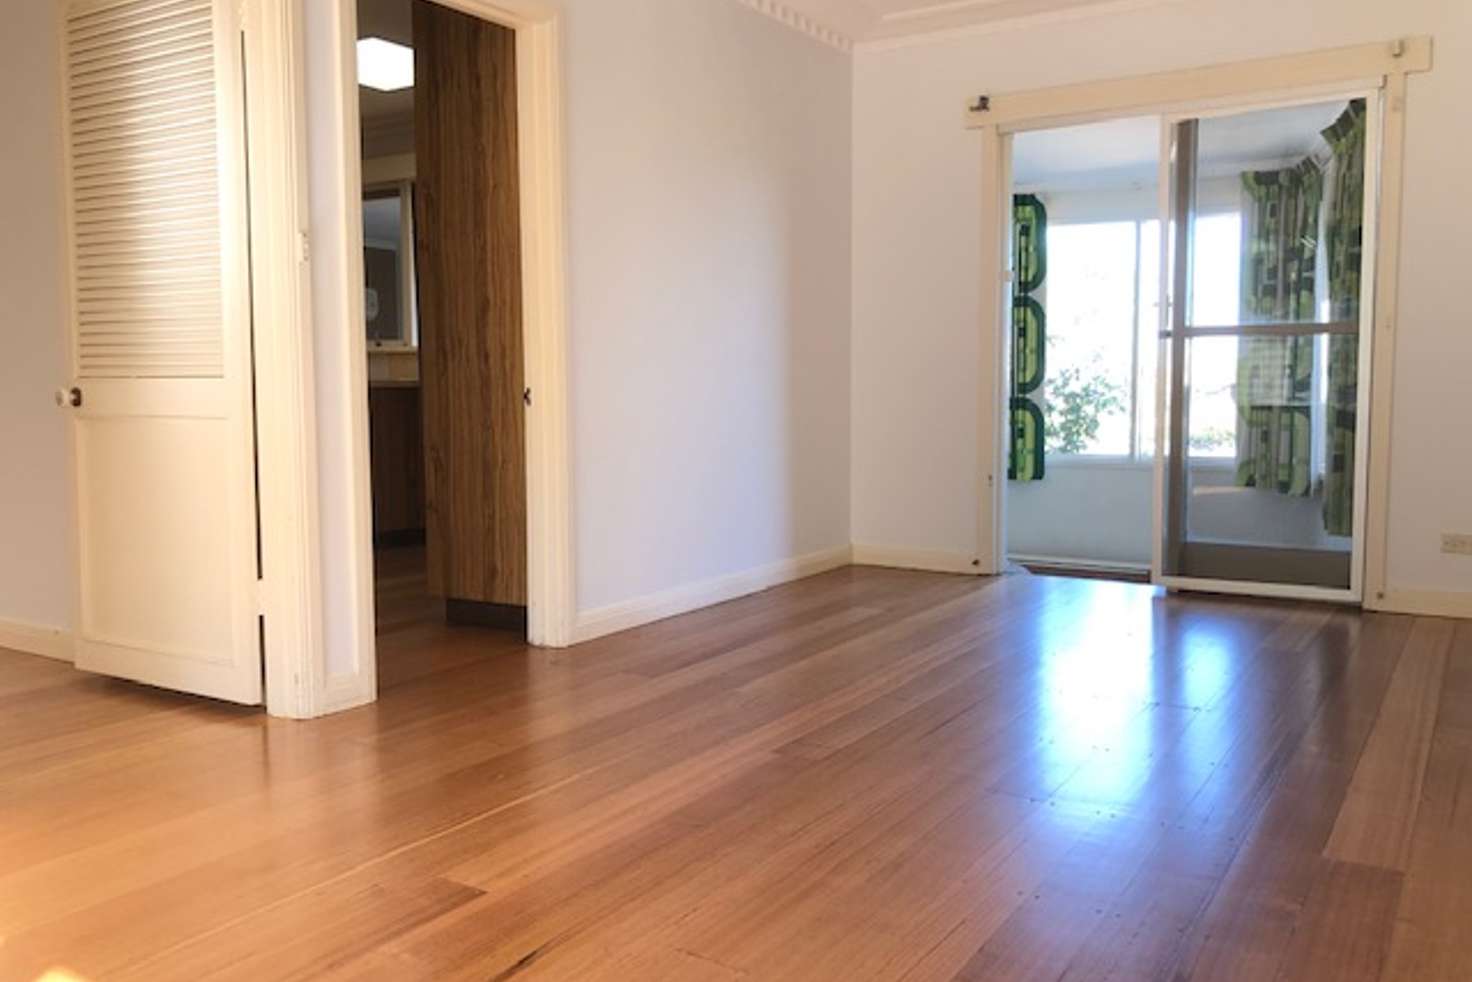 Main view of Homely house listing, 15 Dallas Street, Mount Waverley VIC 3149